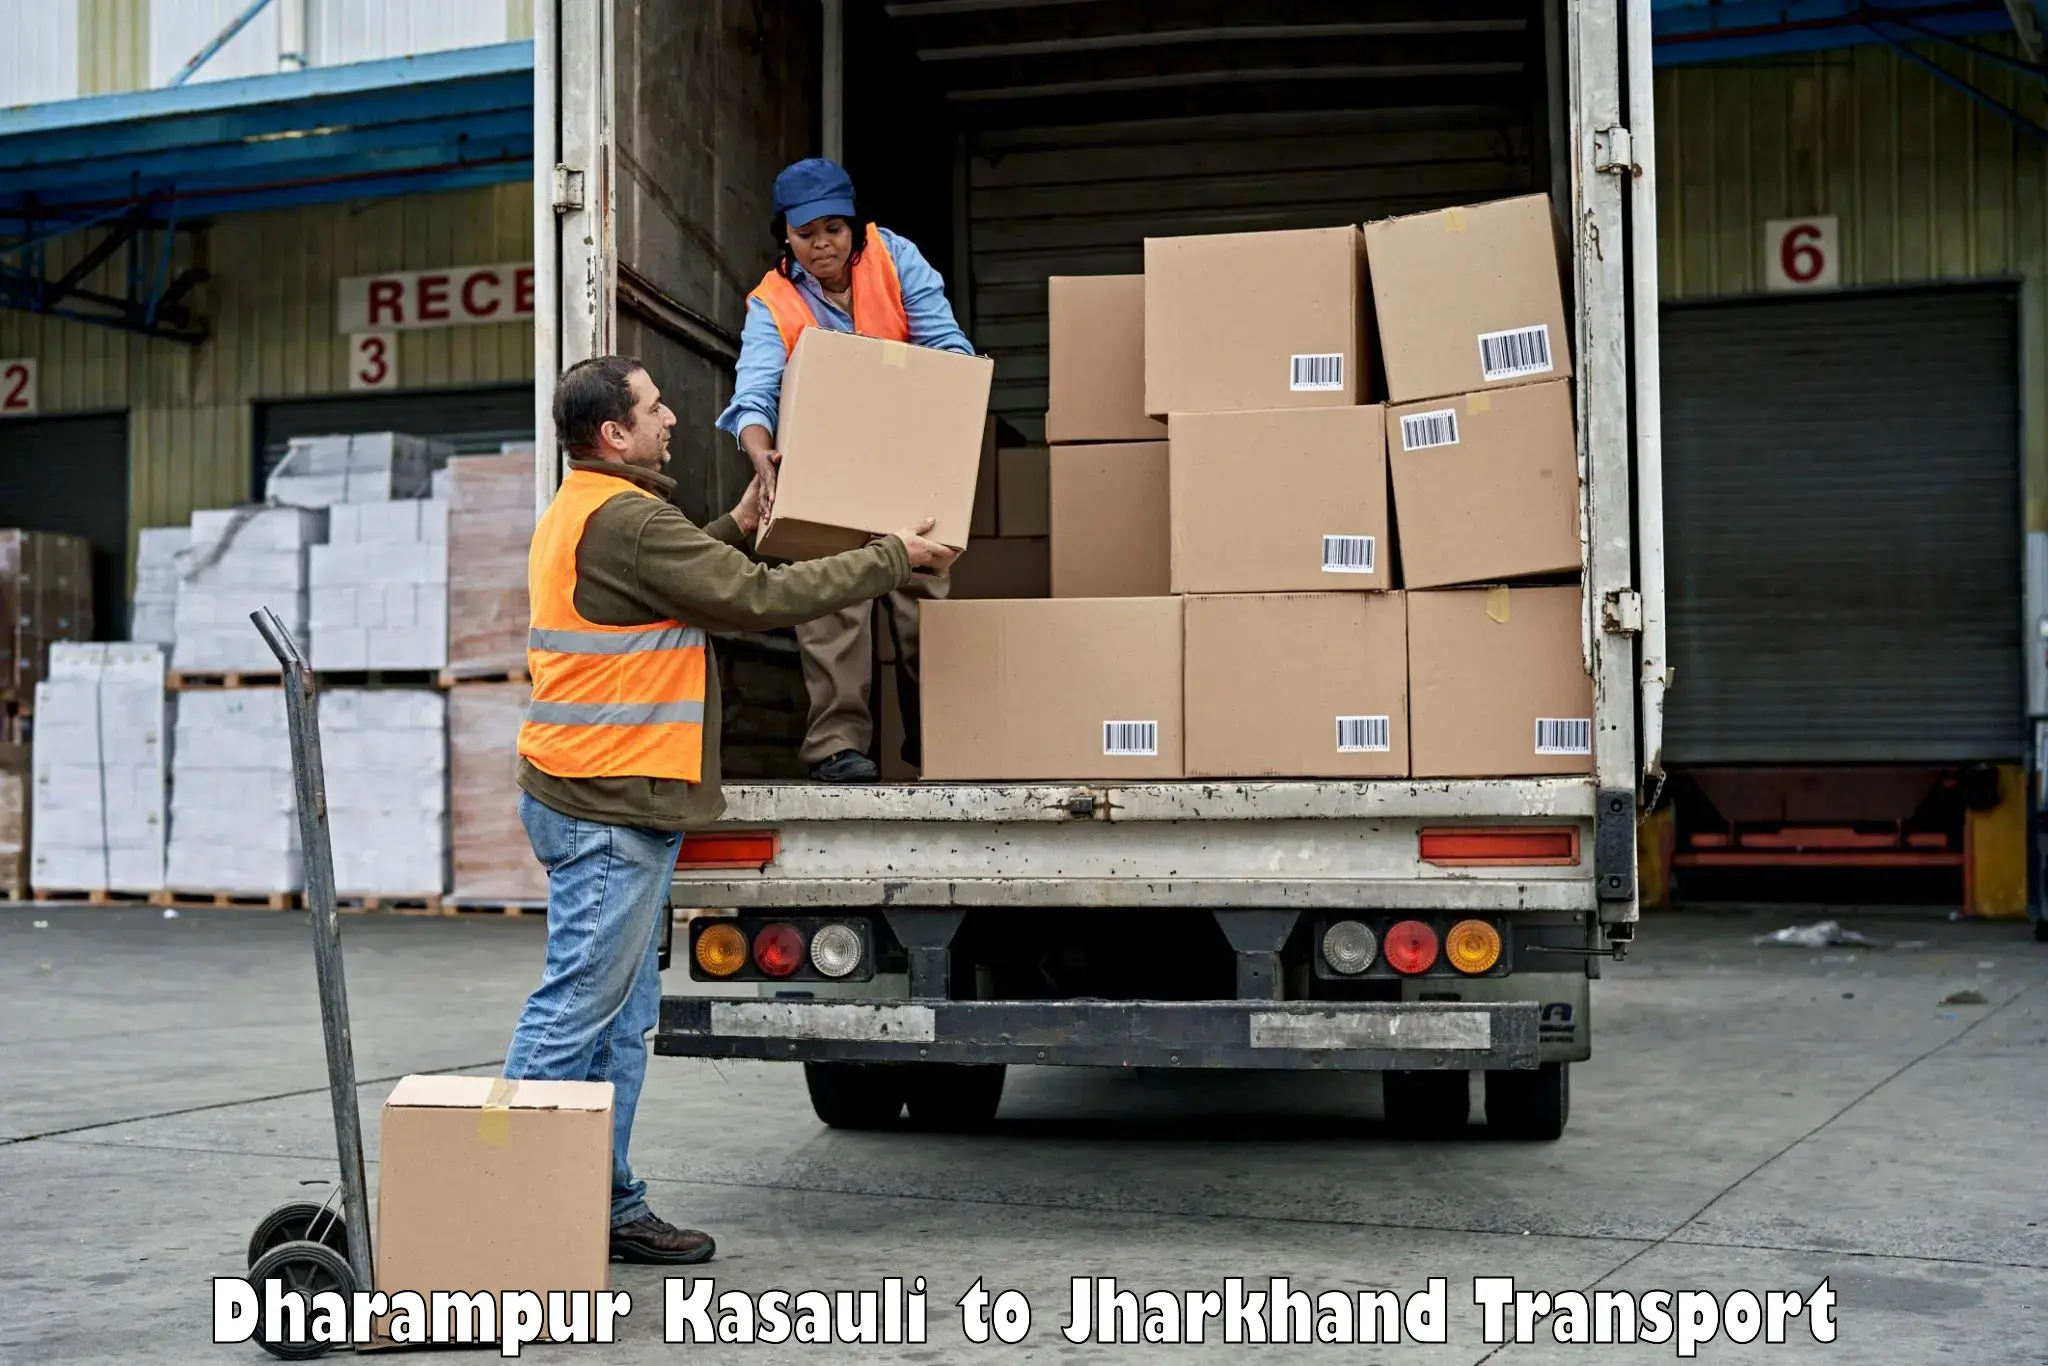 Express transport services in Dharampur Kasauli to Japla